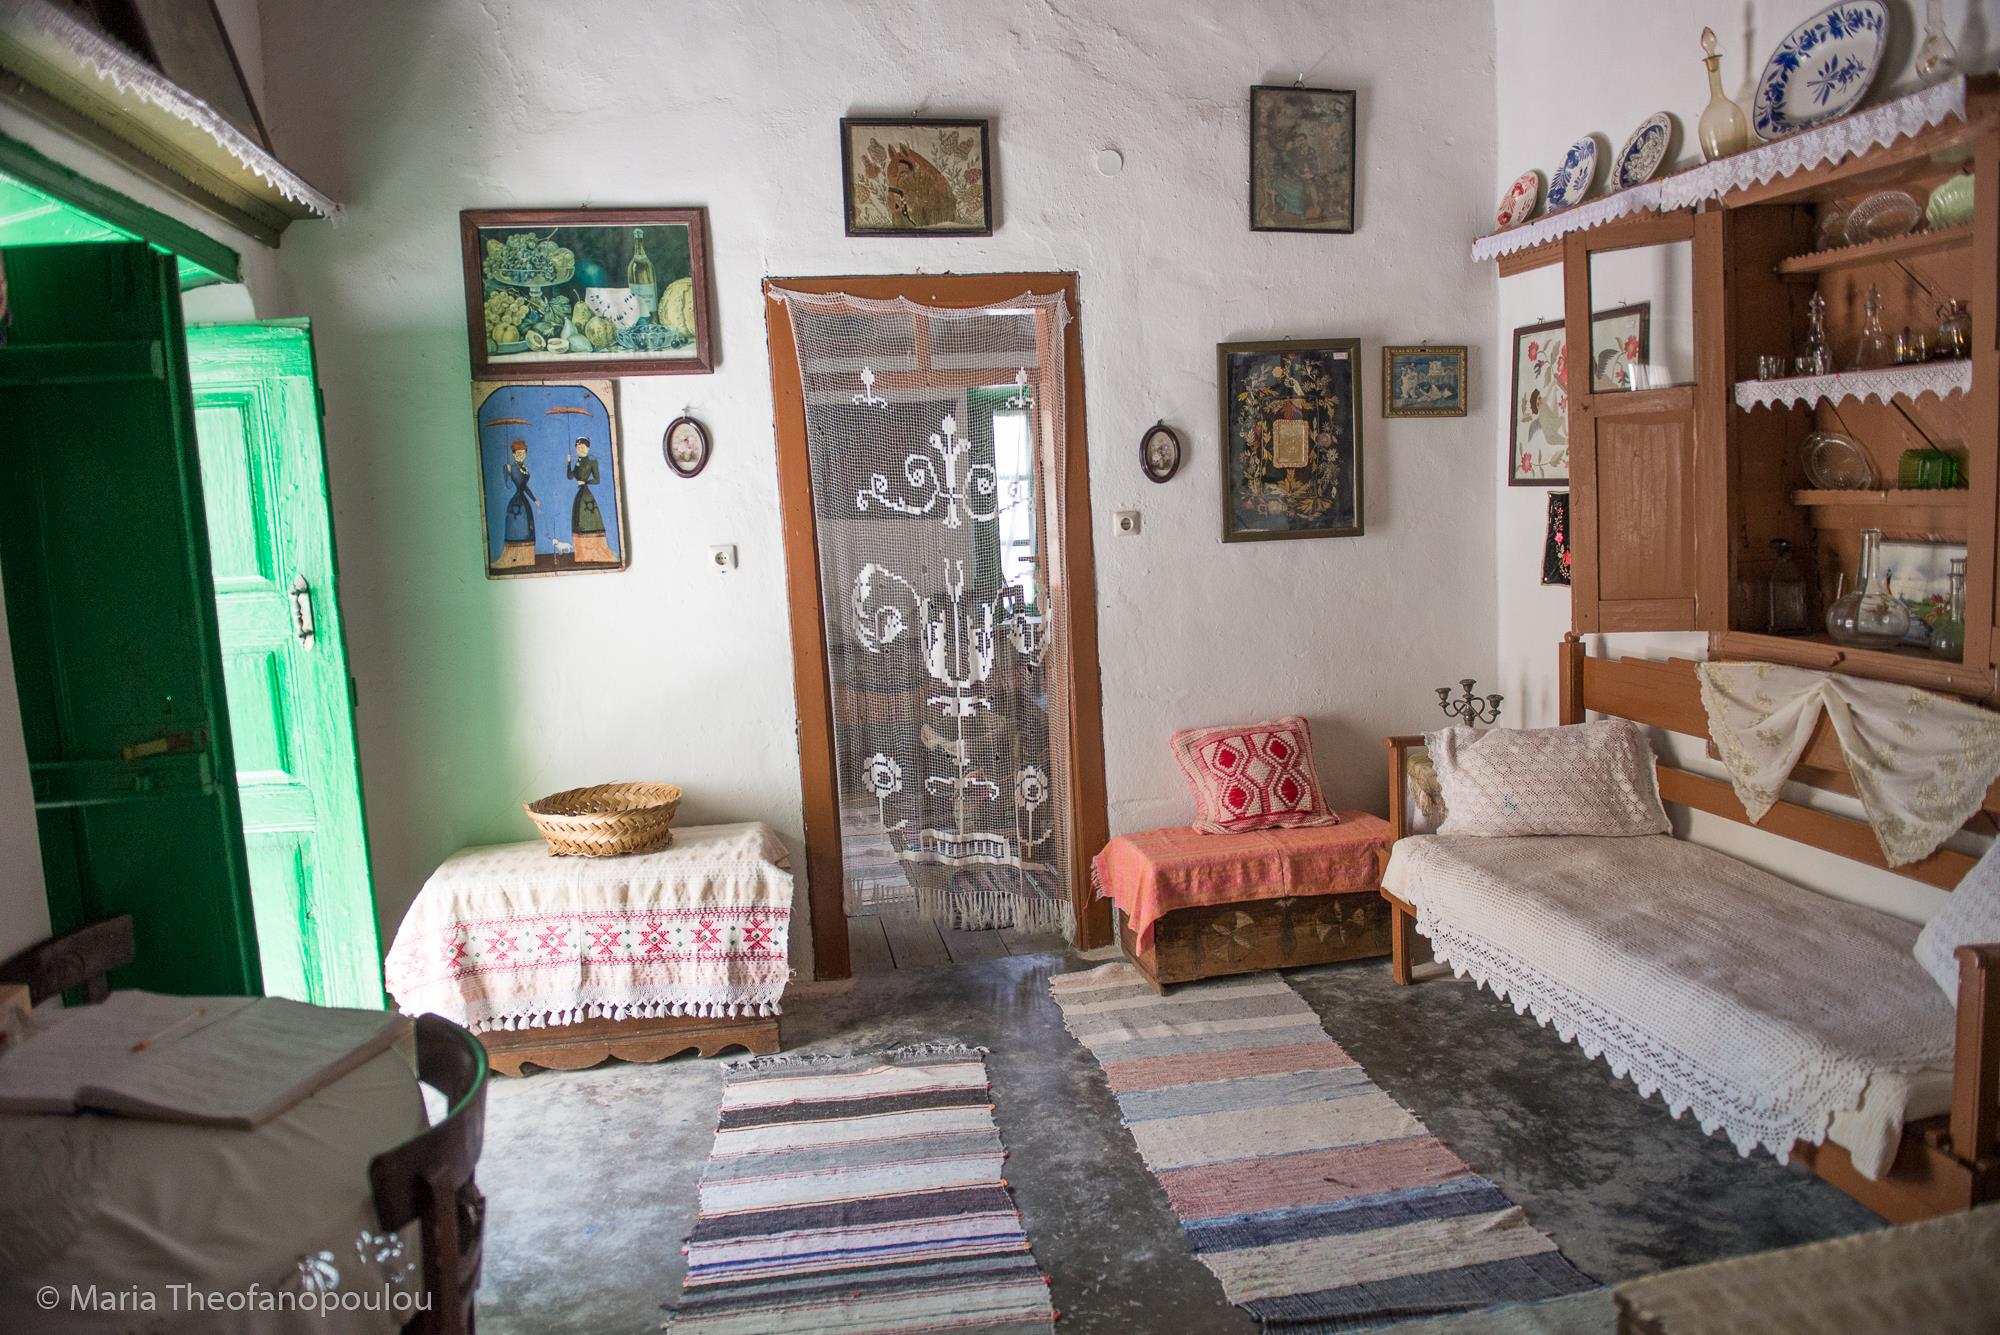 A room in the Folklore Museum PYLI (Small town) KOS